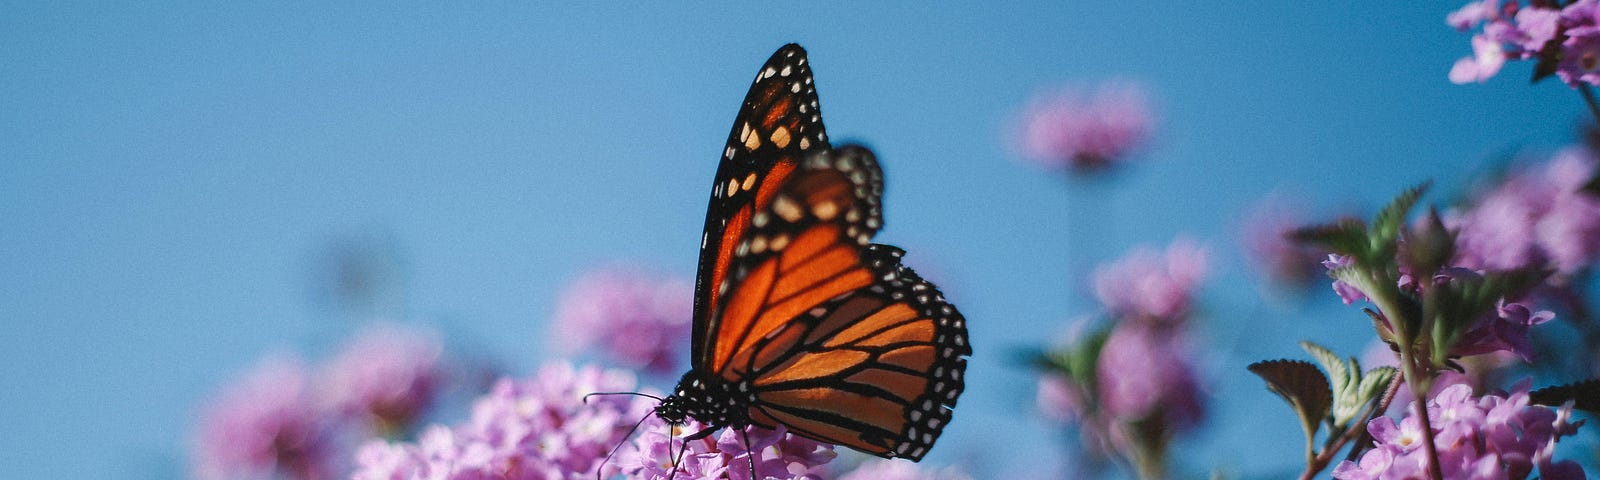 an orange, black, and white monarch butterfly resting on lilac-colored flowers